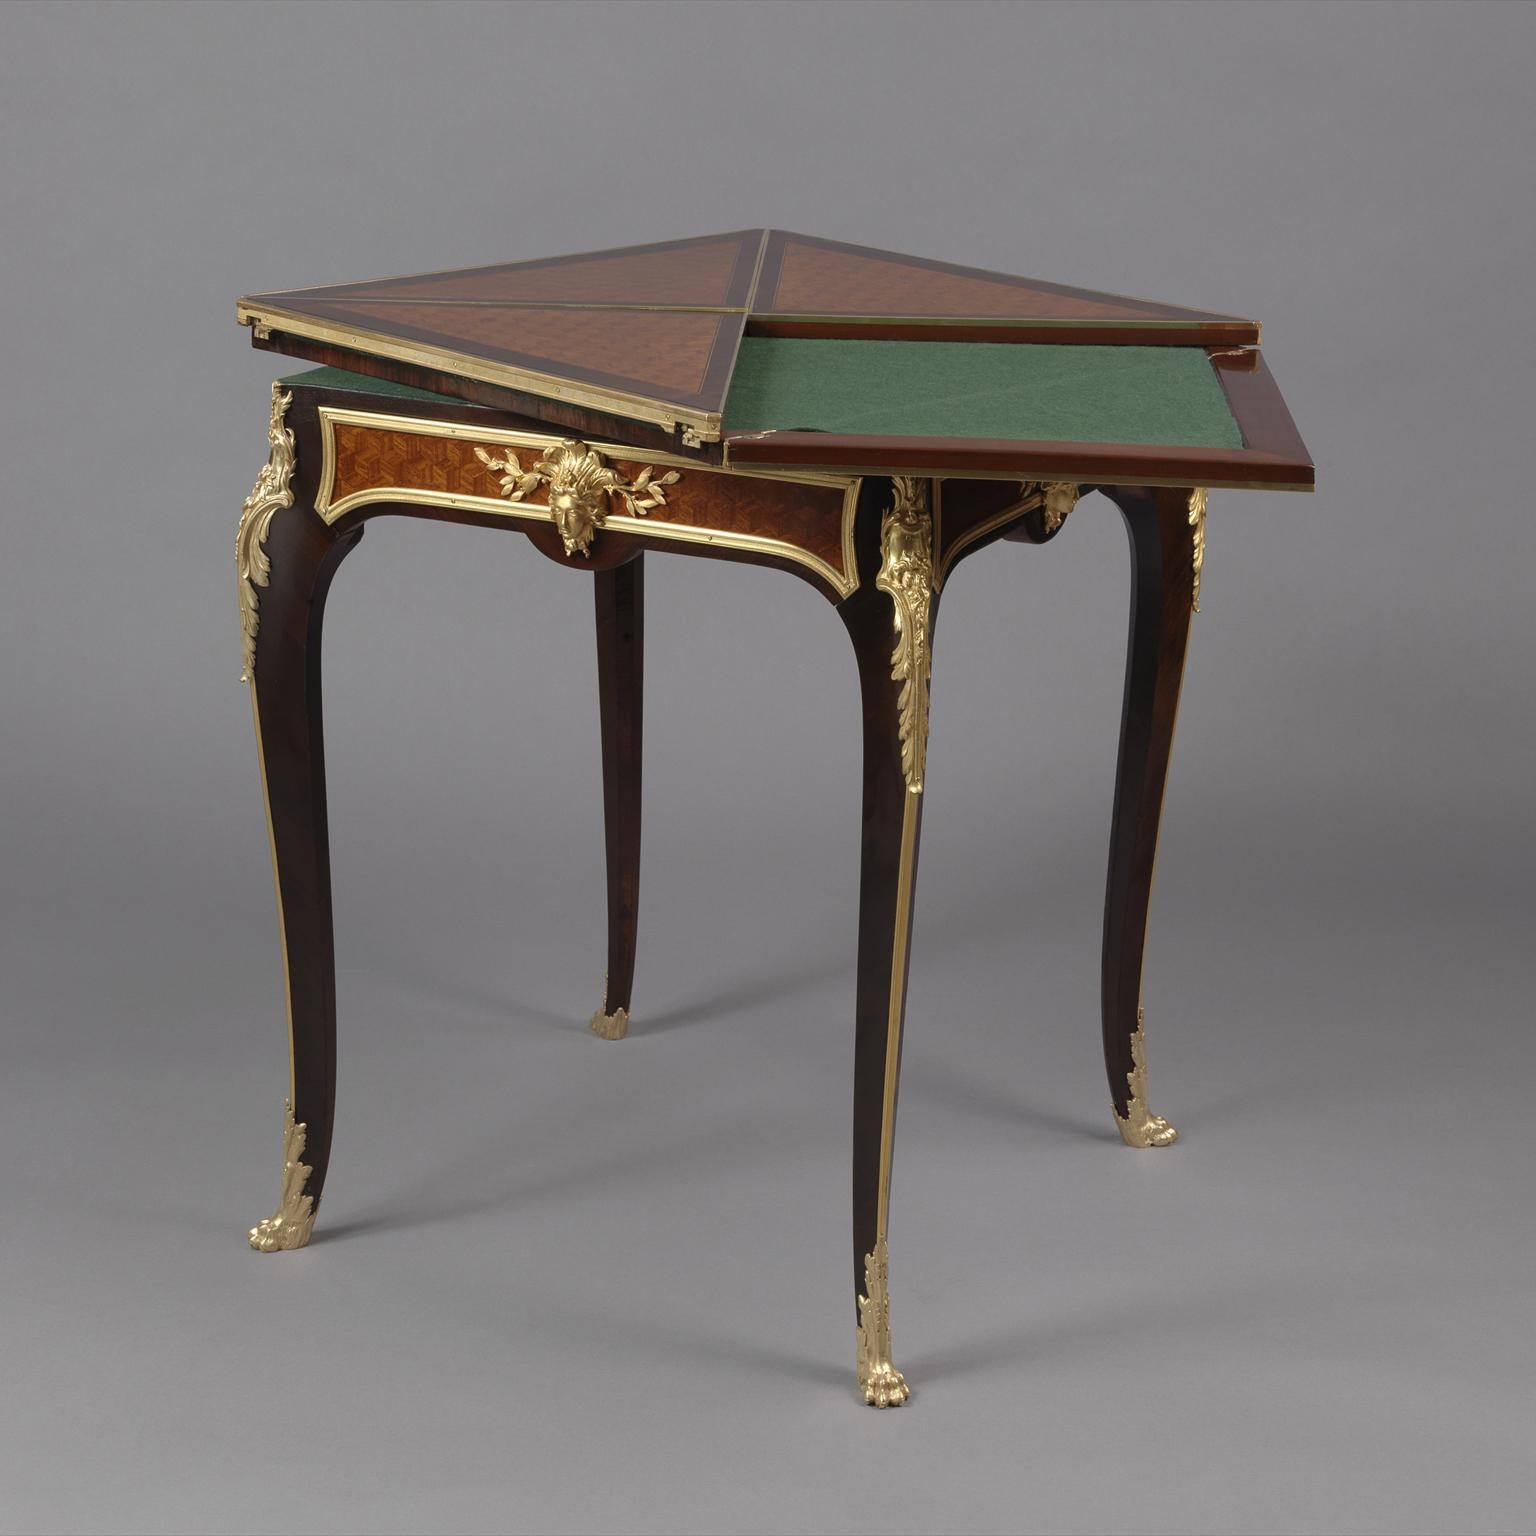 A gilt-bronze mounted parquetry envelope card table by François Linke.
 
Signed to the gilt-bronze 'Linke'. 

This fine card table has a swivel top, with four 'envelope' panels, opening to a green baize playing surface, below is a frieze drawer